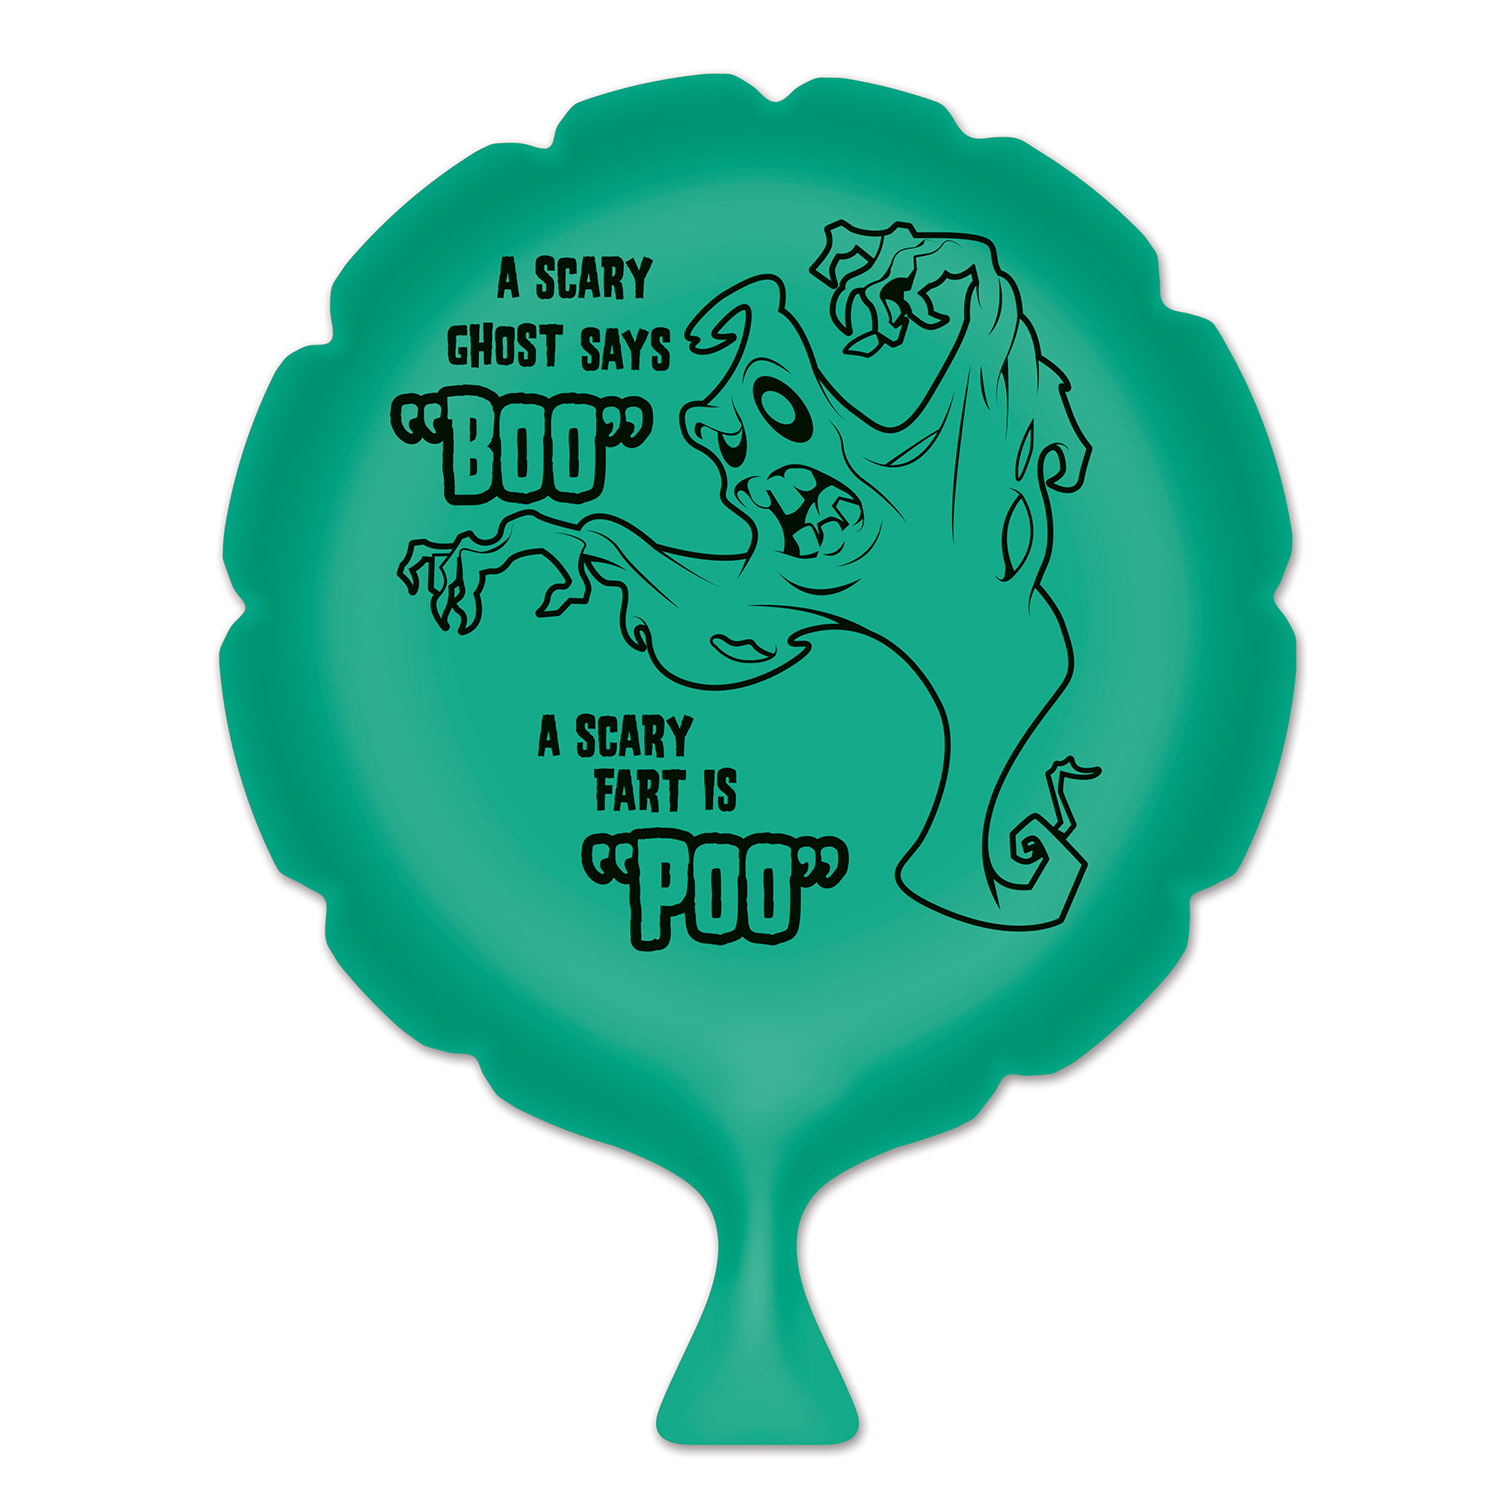 ''A Scary Ghost Says ''''''''''''''''Boo'''''''''''''''' Whoopee Cushion''''''''''